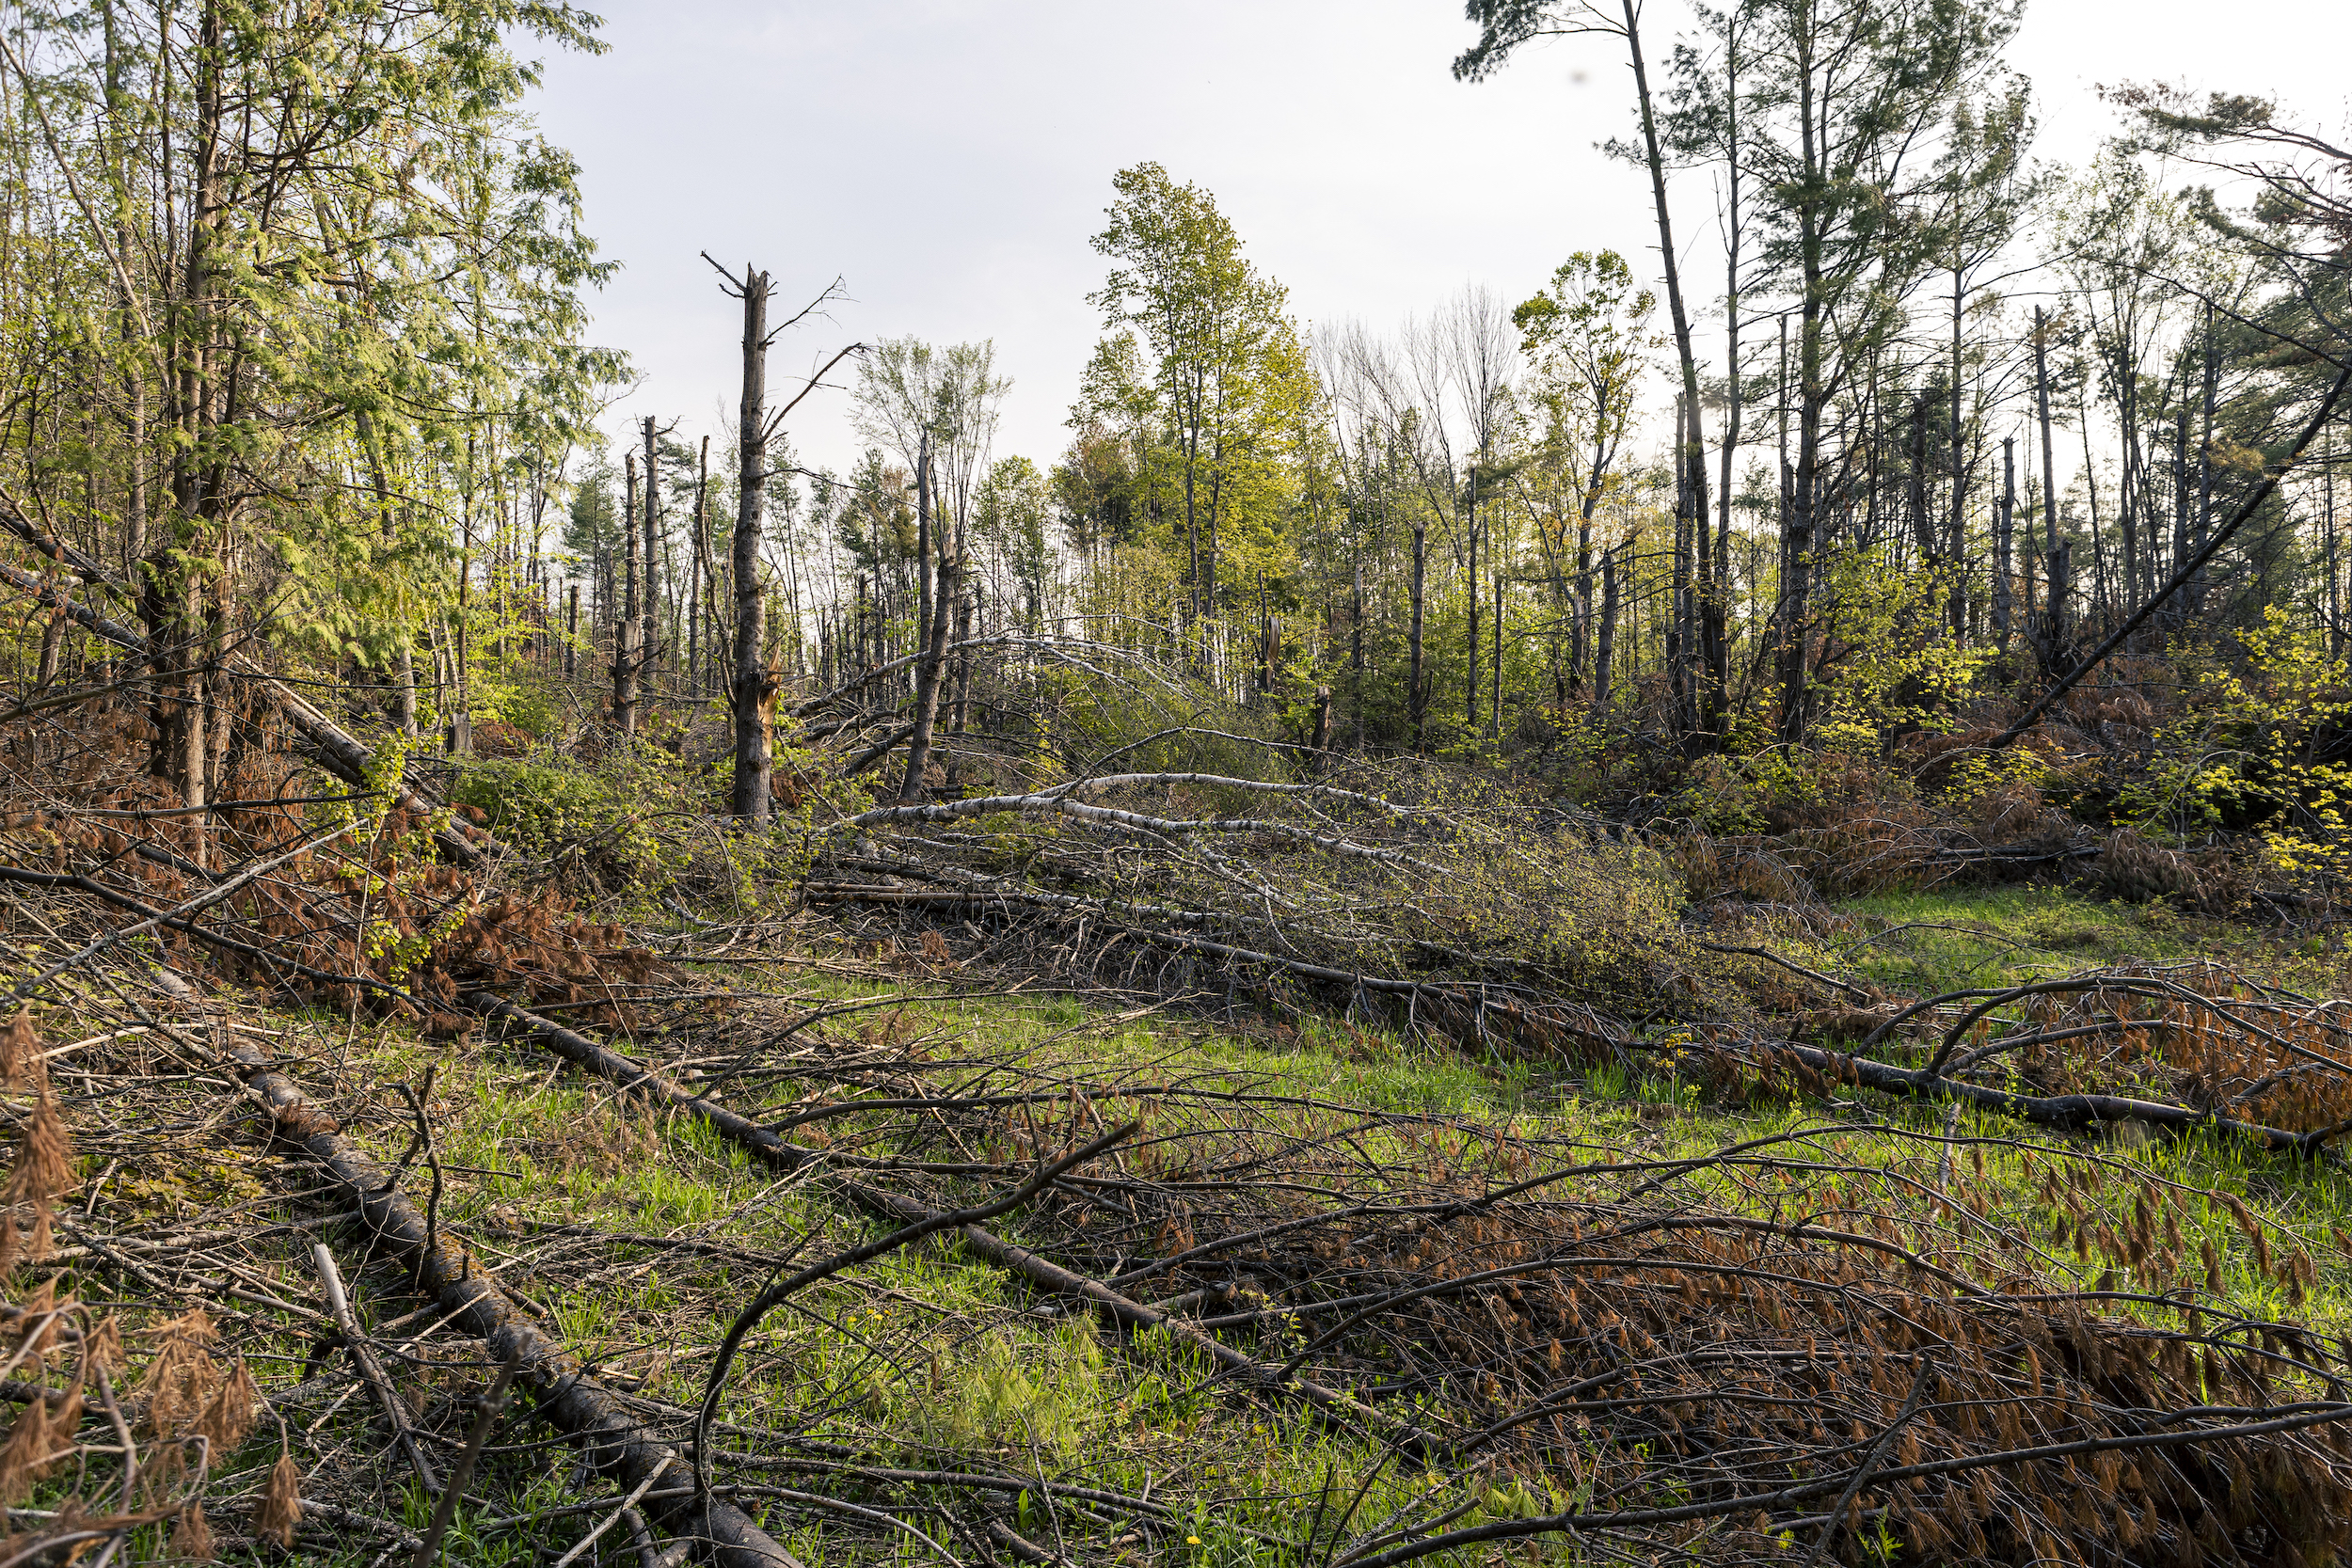 The tornado touched down and lifted off a few times on Shane Mumby's property, barely missing the sugar bush and tearing the woods apart until they were completely unrecognizable. Hemlock trees, normally tough to chop down, were left twisted like rubber. A year later, kilometres of trails are impassable, blocked by debris.